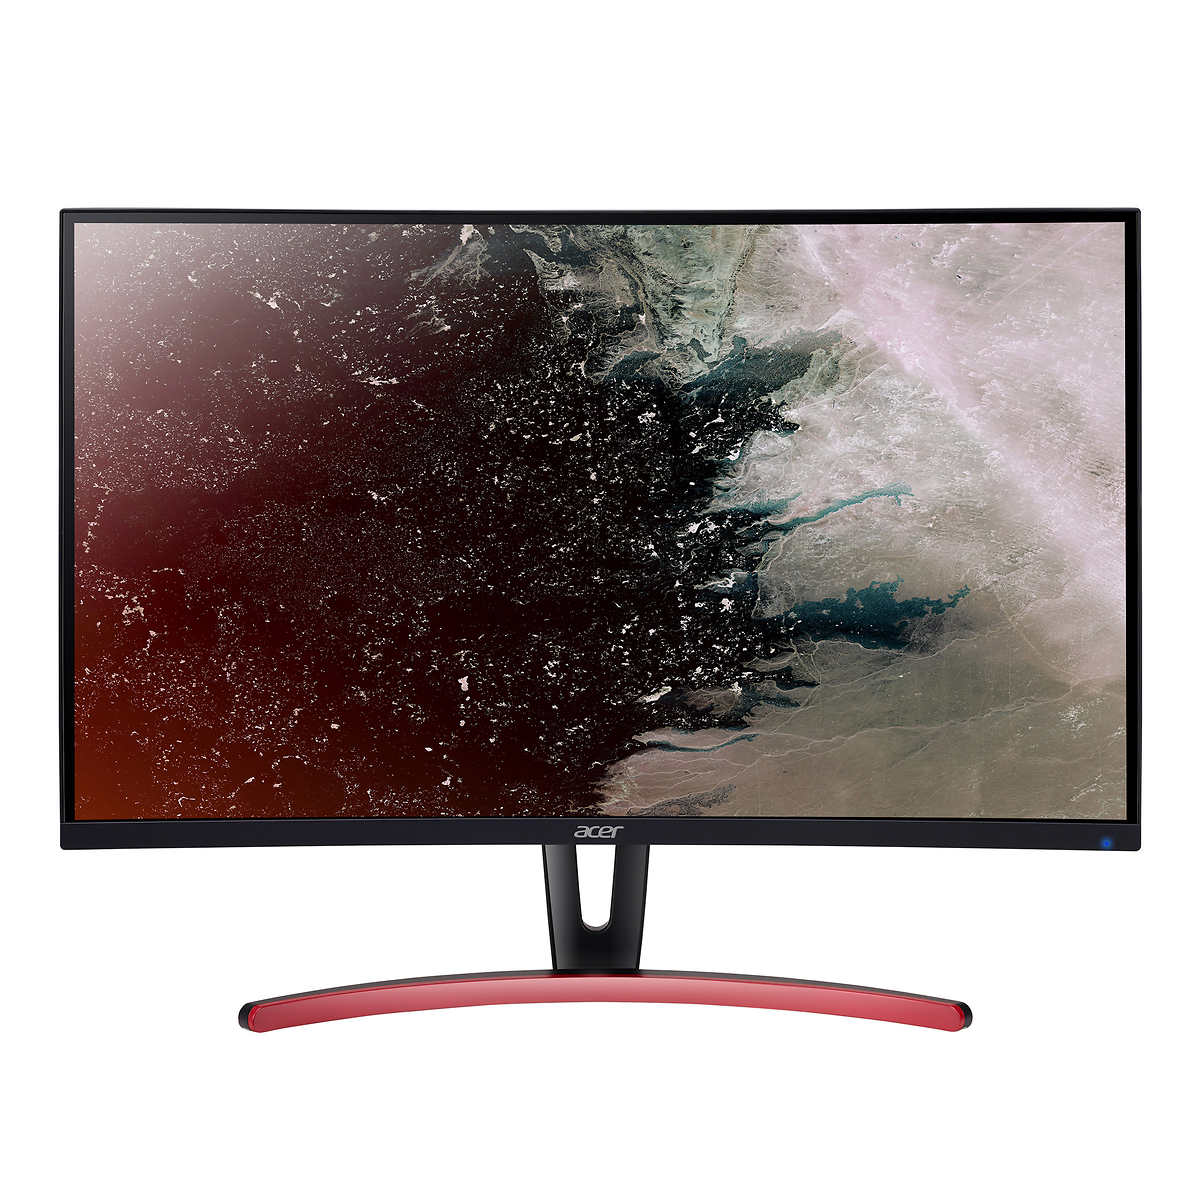 Costco Members: Acer 27&amp;quot; Class Curved WQHD 144Hz FreeSync Gaming Monitor ED273UR $240 + FS